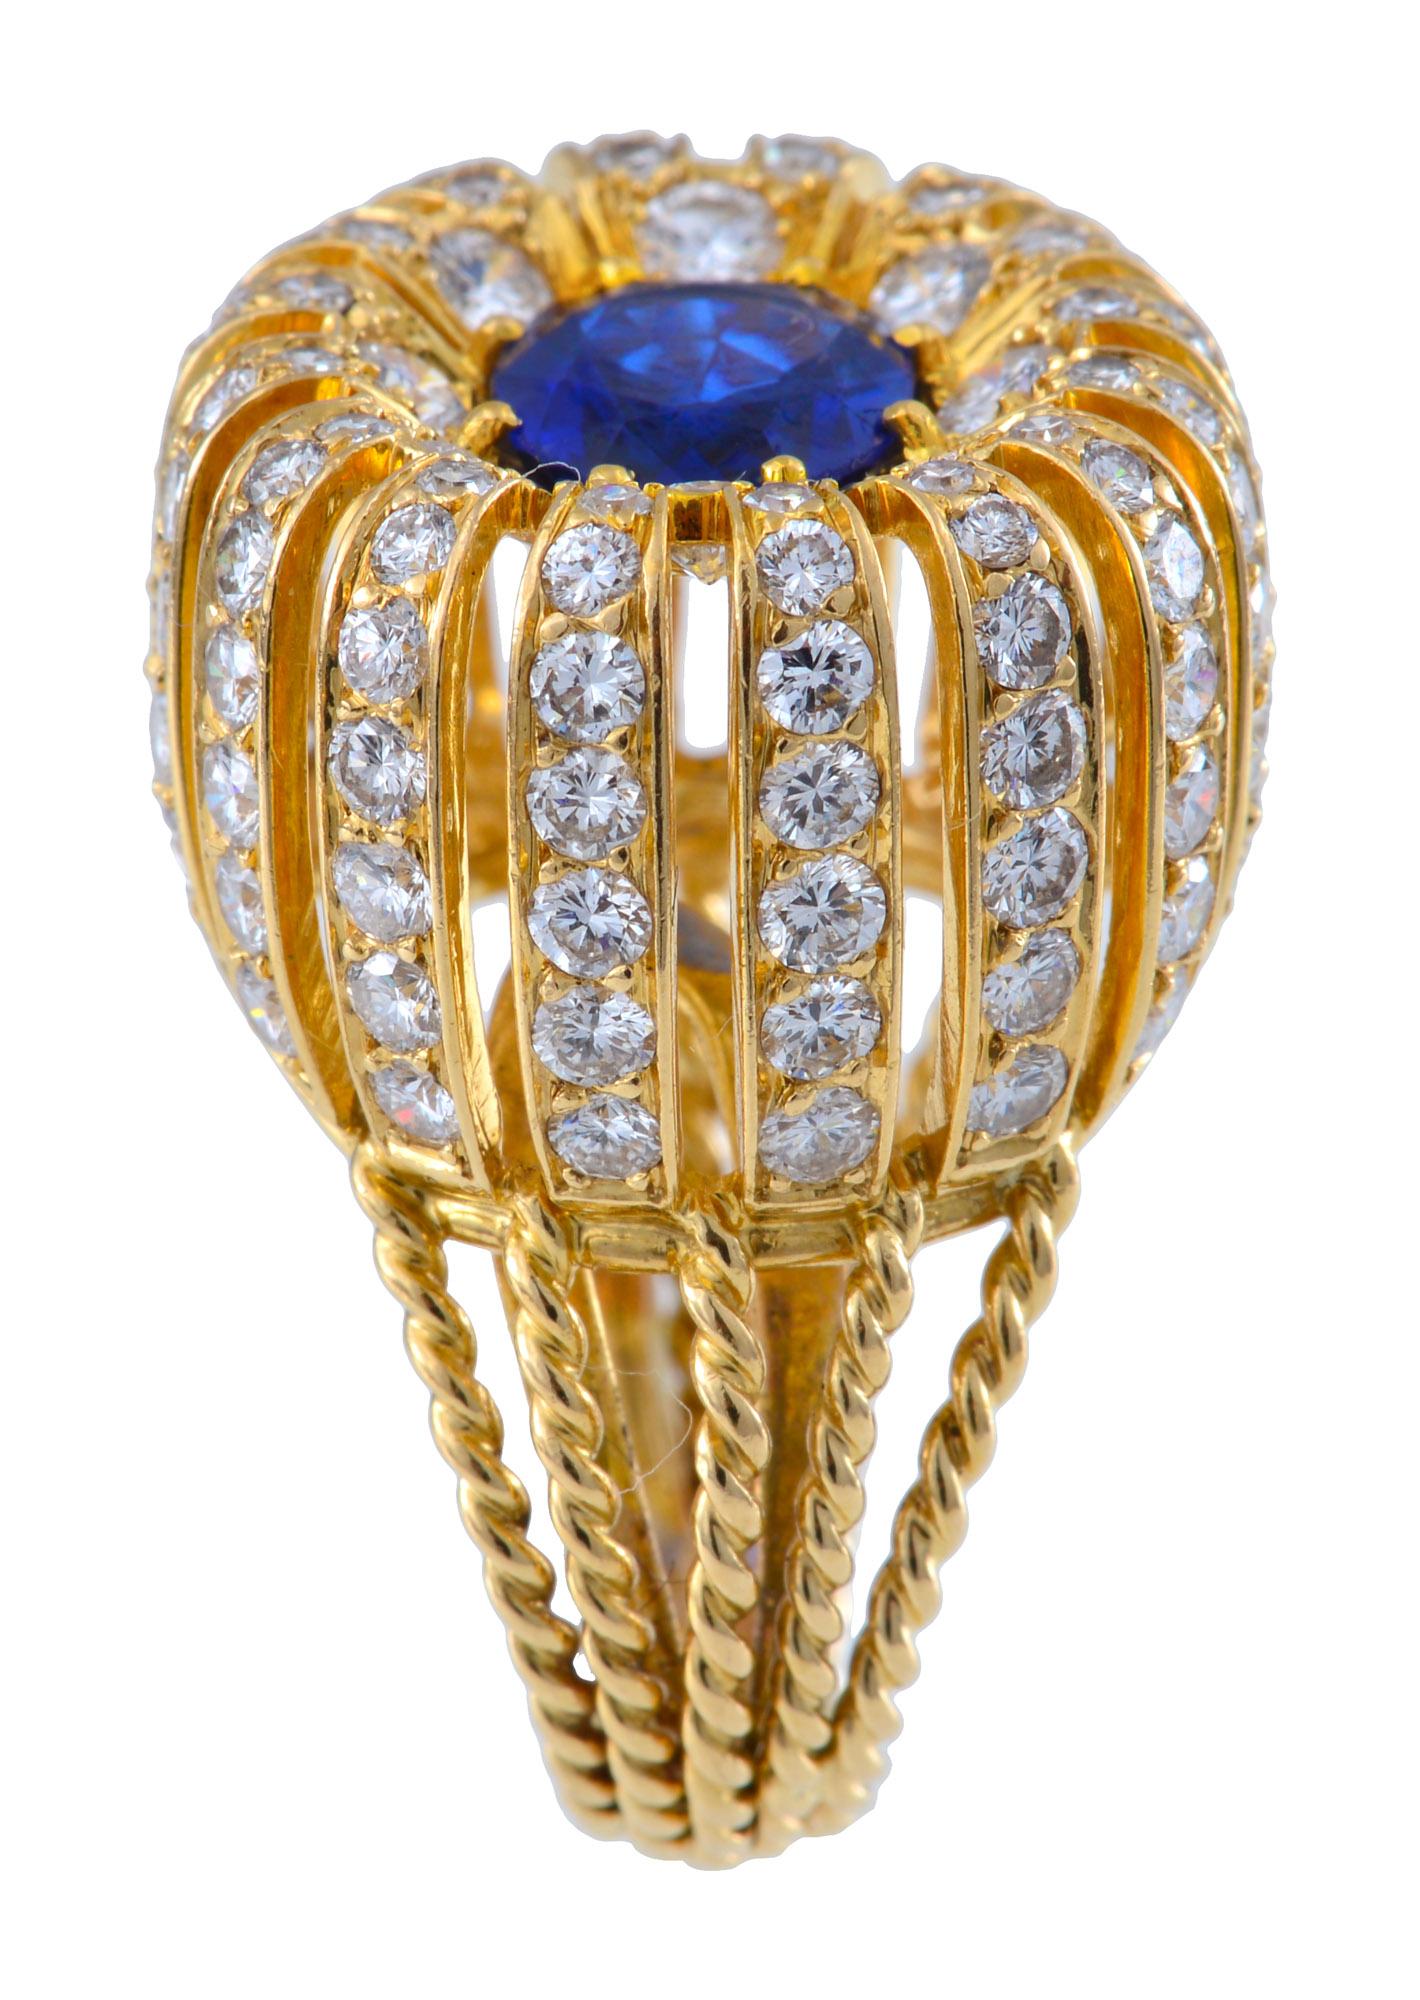 Early 1950s Yellow Gold, Diamond and Sapphire Ring In Excellent Condition For Sale In Melbourne, Victoria